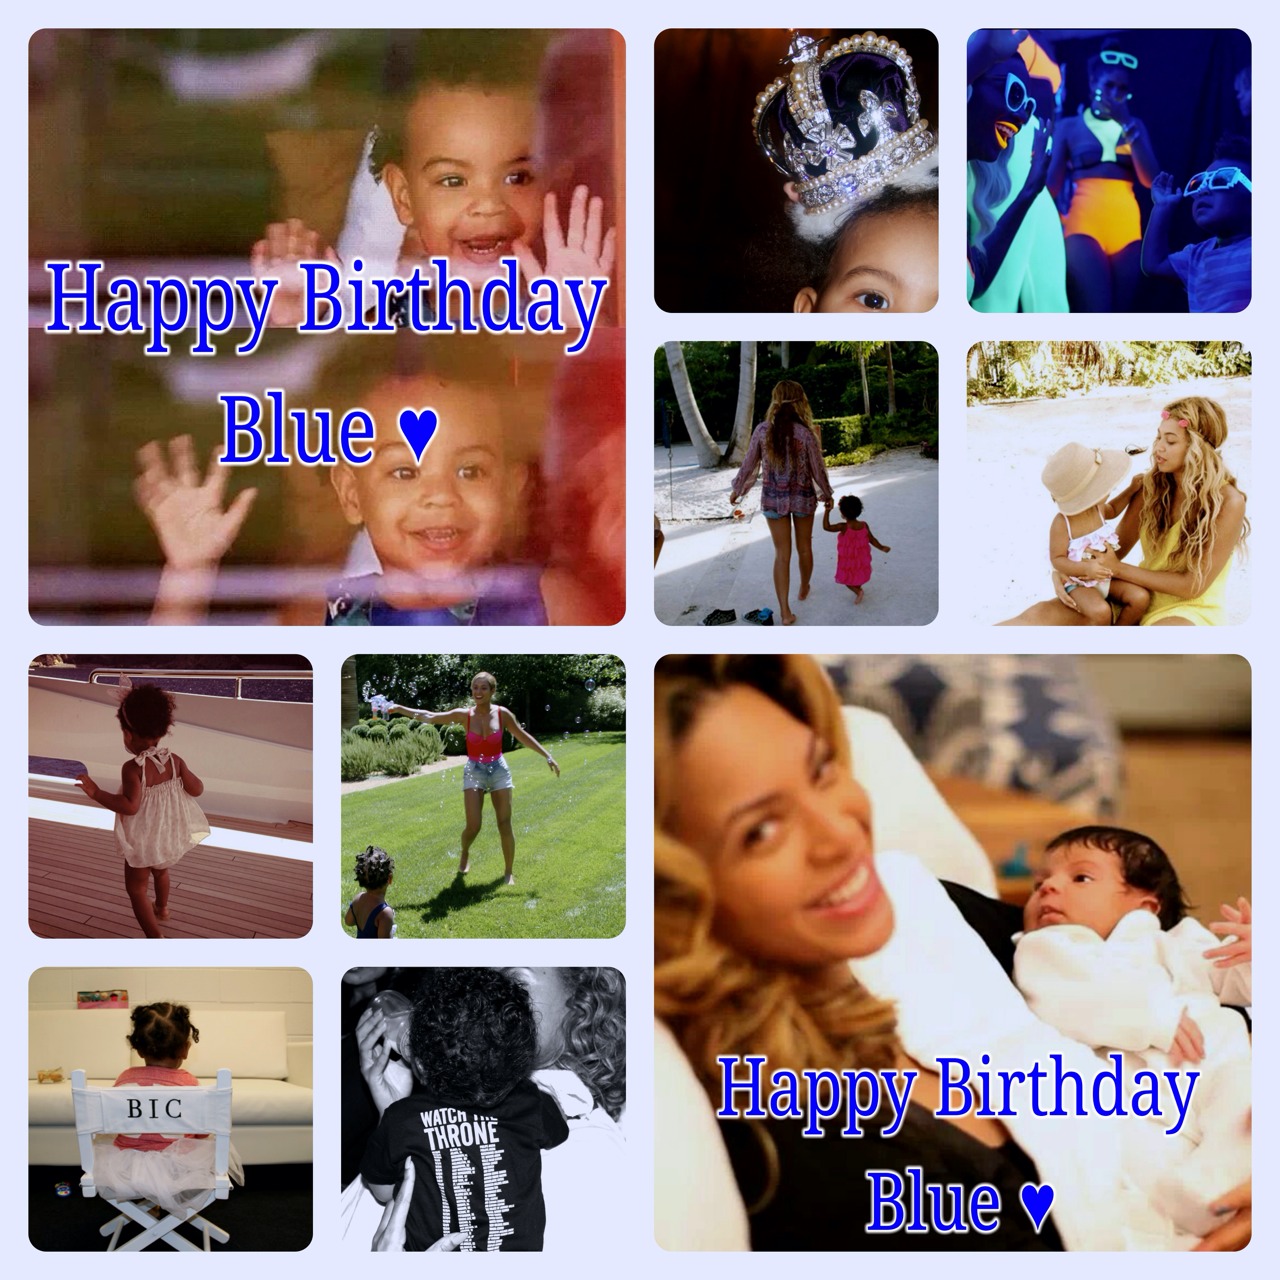 Beyoncé Commemorates Blue Ivy's 2nd Birthday with Fan Tumblr Blog1280 x 1280